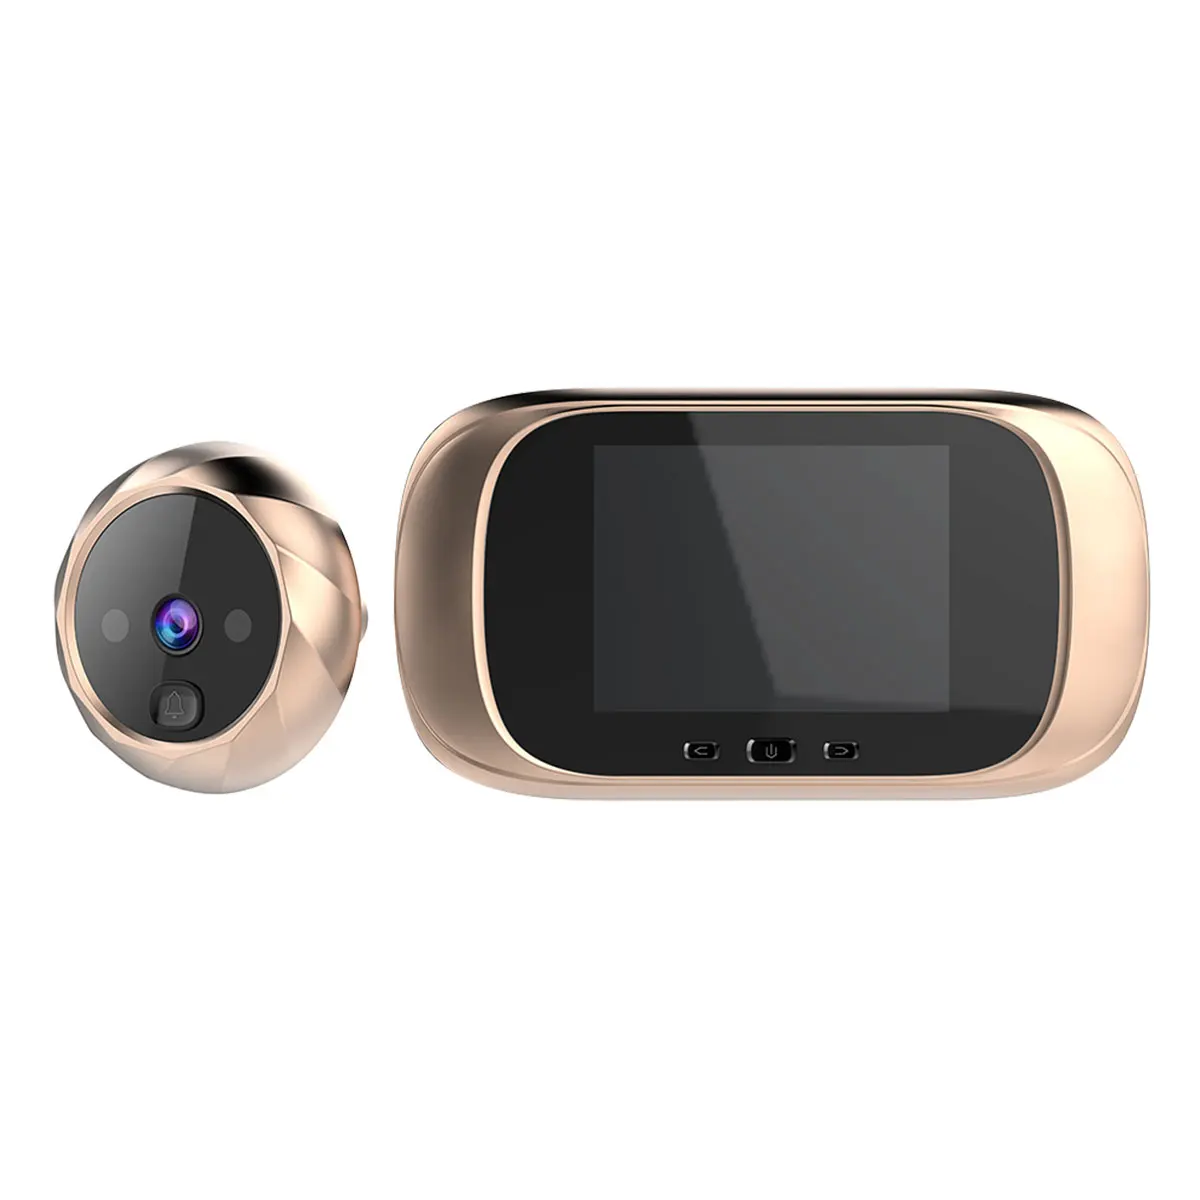 2.8Inch LCD Display  Take Photo and  Video Door Phone Long Time Standby HD Visual Doorbell Peephole Viewer enlarge